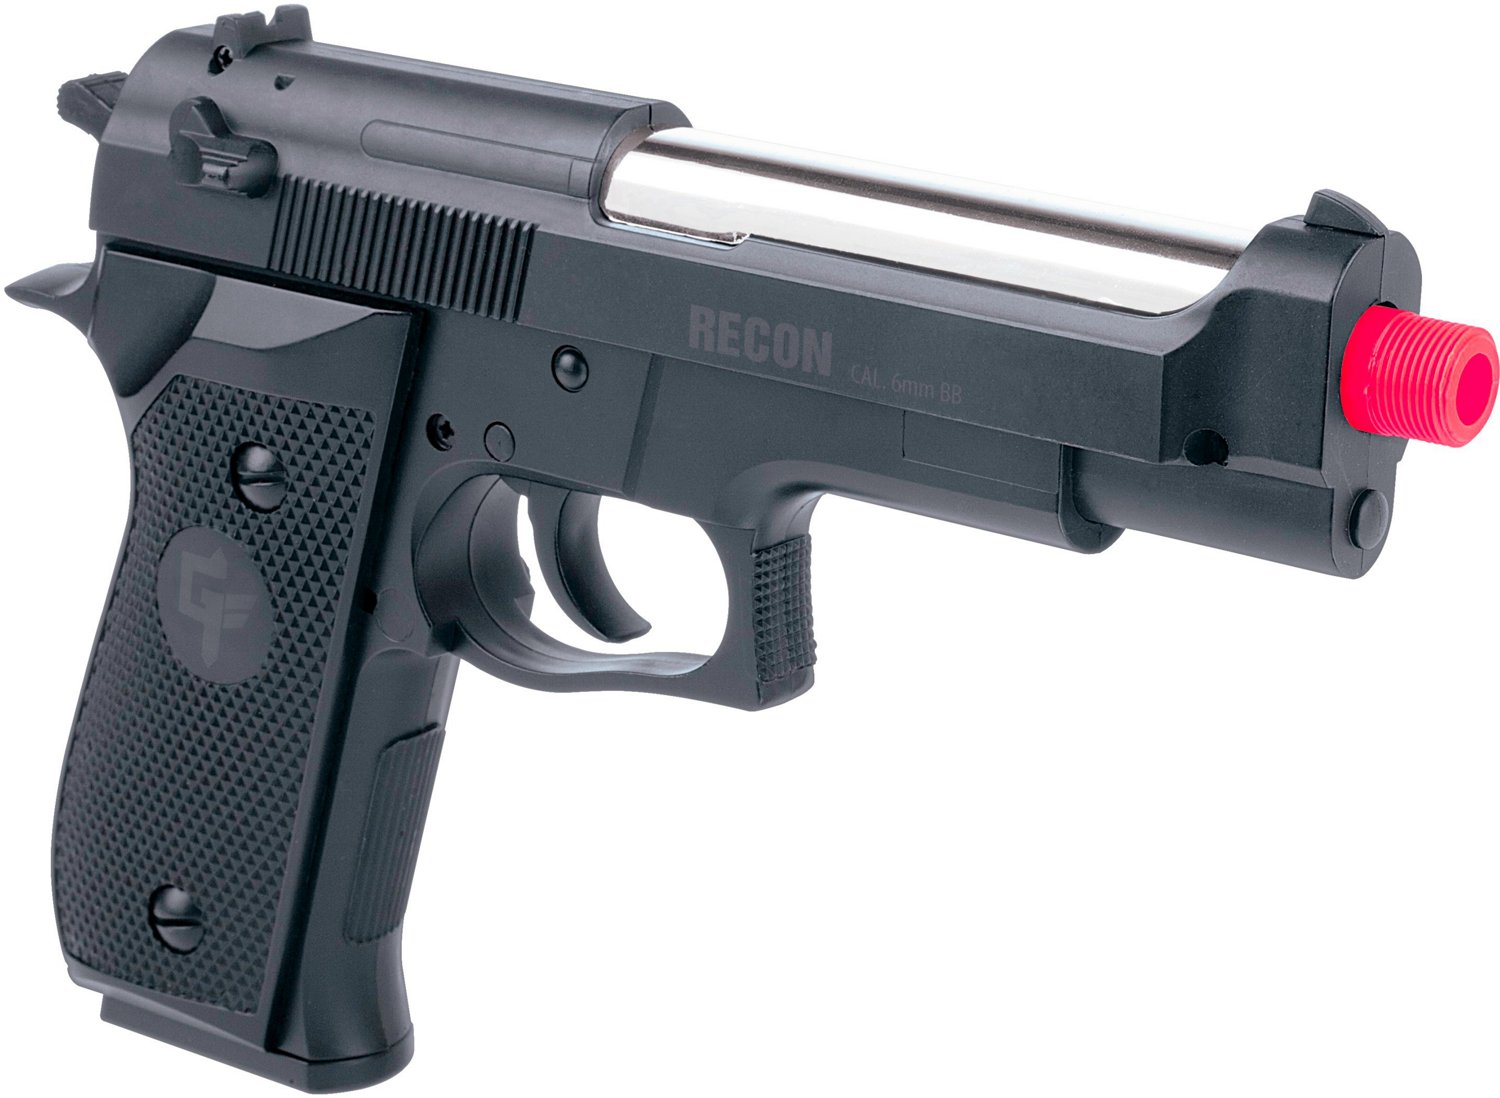 The GameFace GFRAP22B 6mm Caliber Airsoft Recon Pistol is designed for use ...